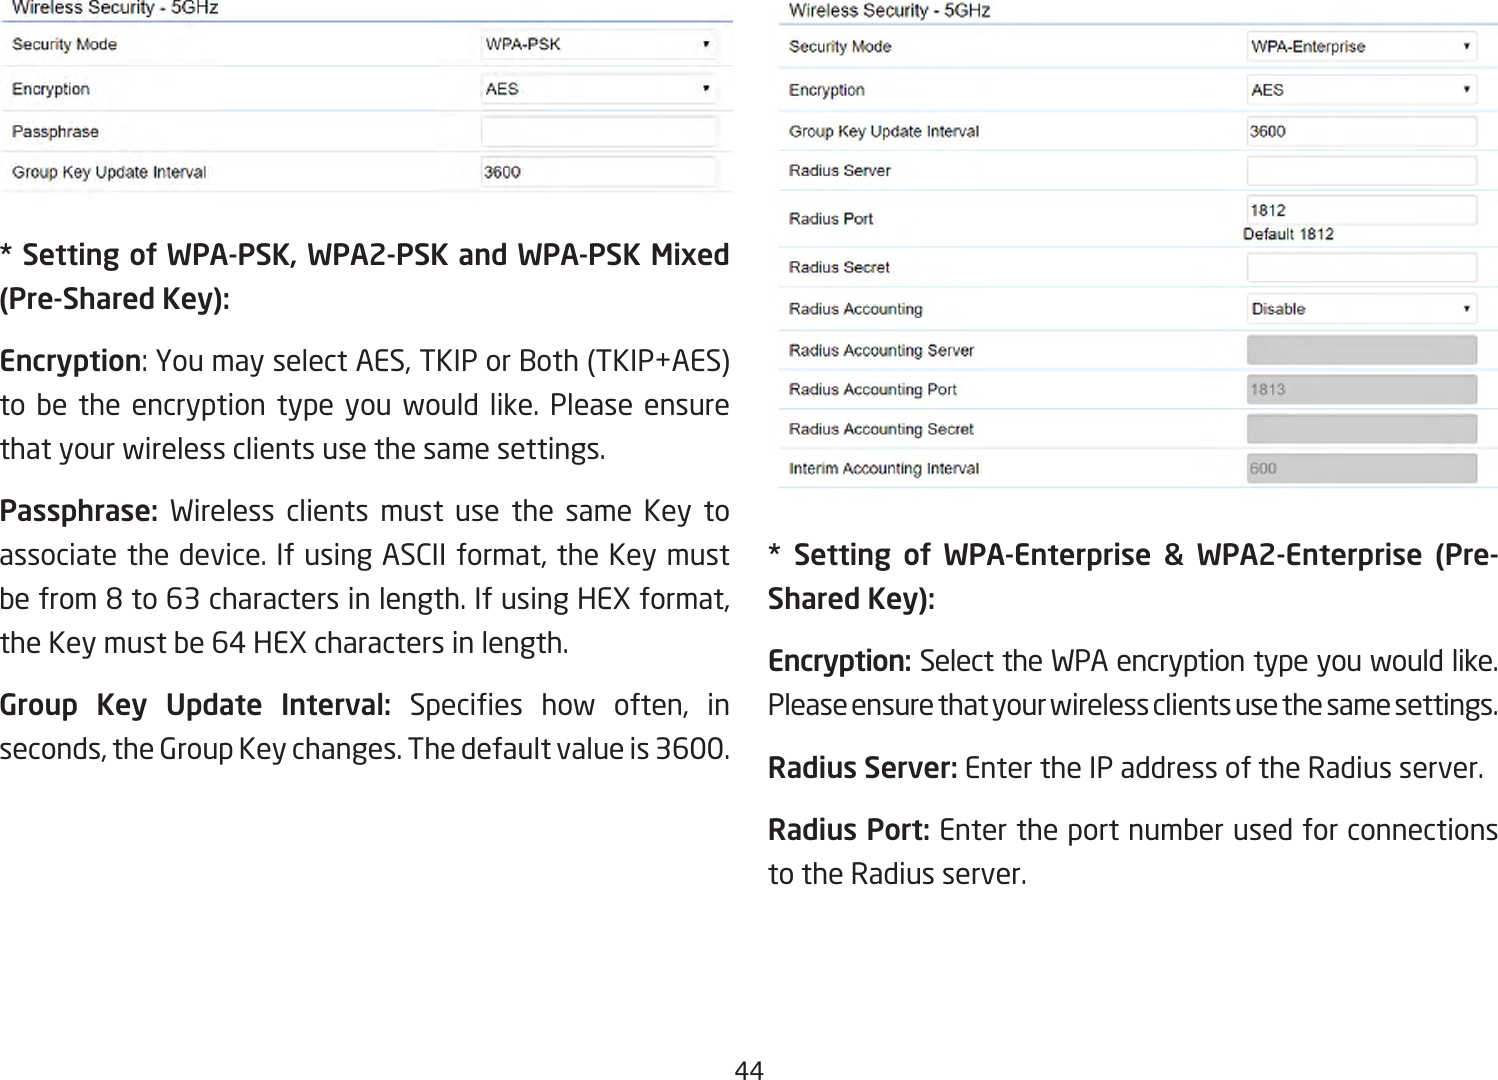 44* Setting of WPA-PSK, WPA2-PSK and WPA-PSK Mixed (Pre-Shared Key):Encryption: You may select AES, TKIP or Both (TKIP+AES) to be the encryption type you would like. Please ensure that your wireless clients use the same settings.Passphrase:  Wireless clients must use the same Key to associate the device. If using ASCII format, the Key must befrom8to63charactersinlength.IfusingHEXformat,theKeymustbe64HEXcharactersinlength.Group Key Update Interval: Species how often, inseconds, the Group Key changes. The default value is 3600.** Setting of WPA-Enterprise &amp; WPA2-Enterprise (Pre-Shared Key):Encryption: Select the WPA encryption type you would like. Please ensure that your wireless clients use the same settings.Radius Server: Enter the IP address of the Radius server.Radius Port: Enter the port number used for connections to the Radius server.